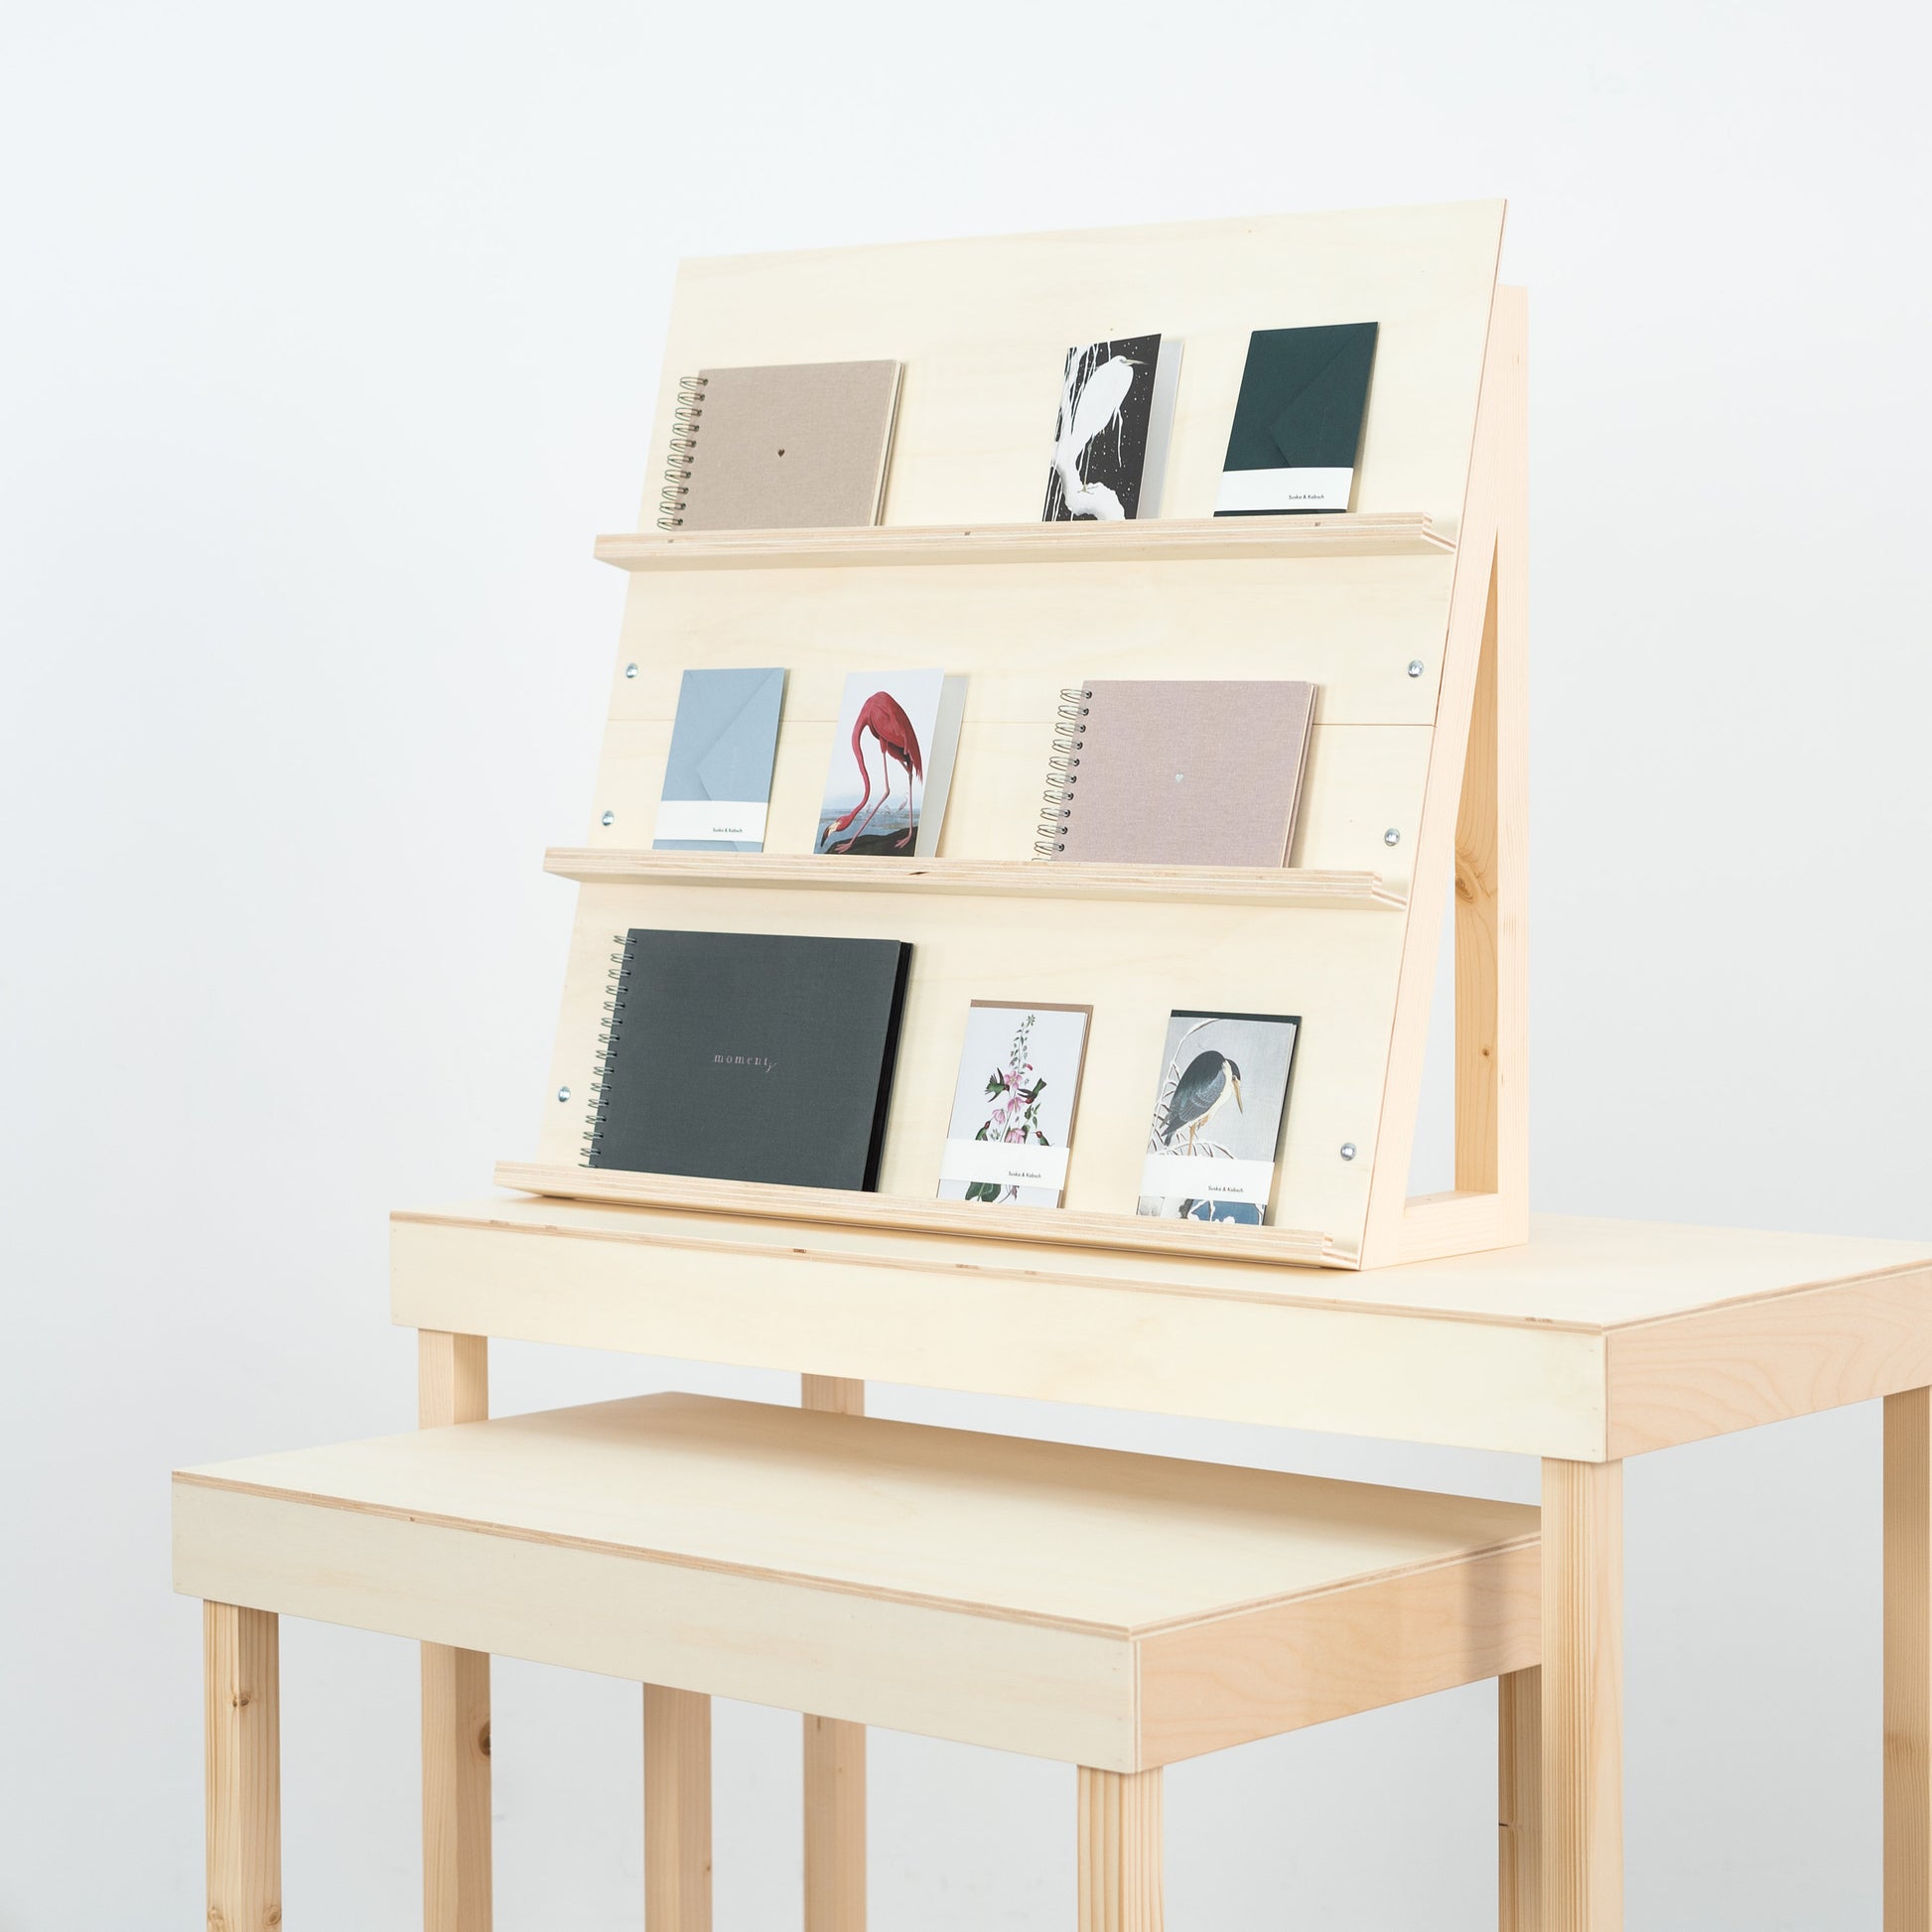 Wooden display stand for notebooks, books, planners, cards